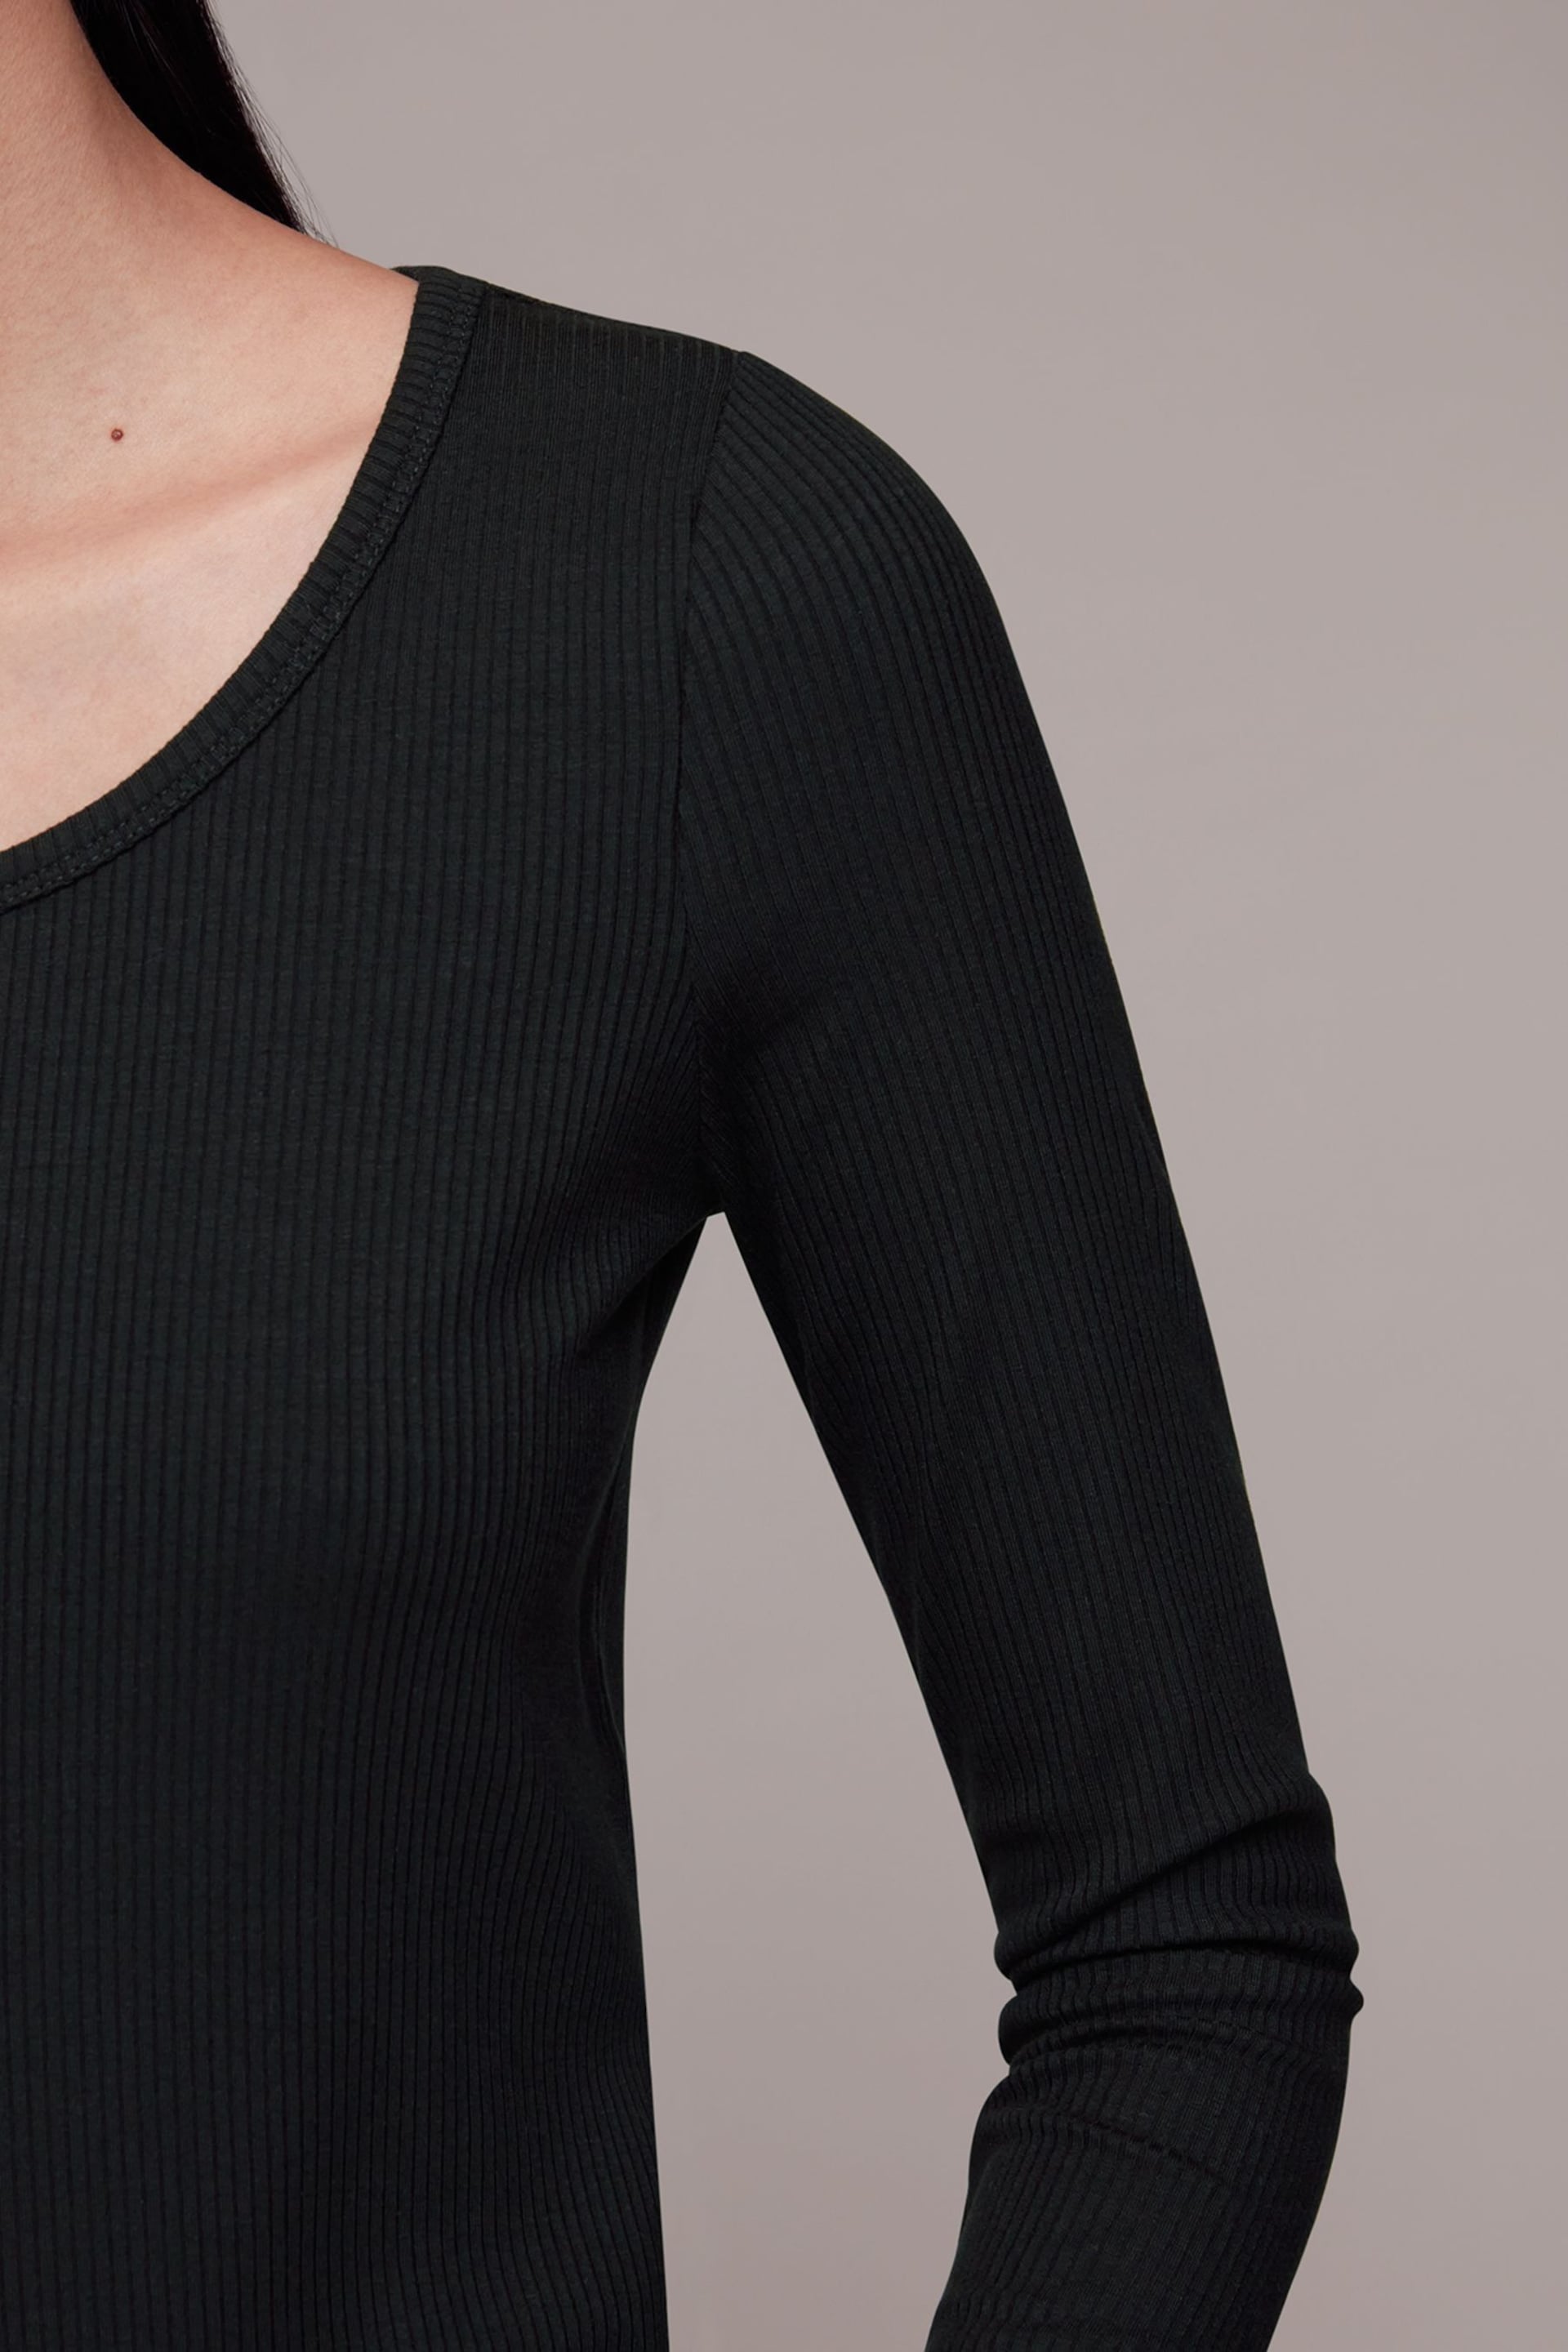 Whistles Ribbed Black Top - Image 4 of 5